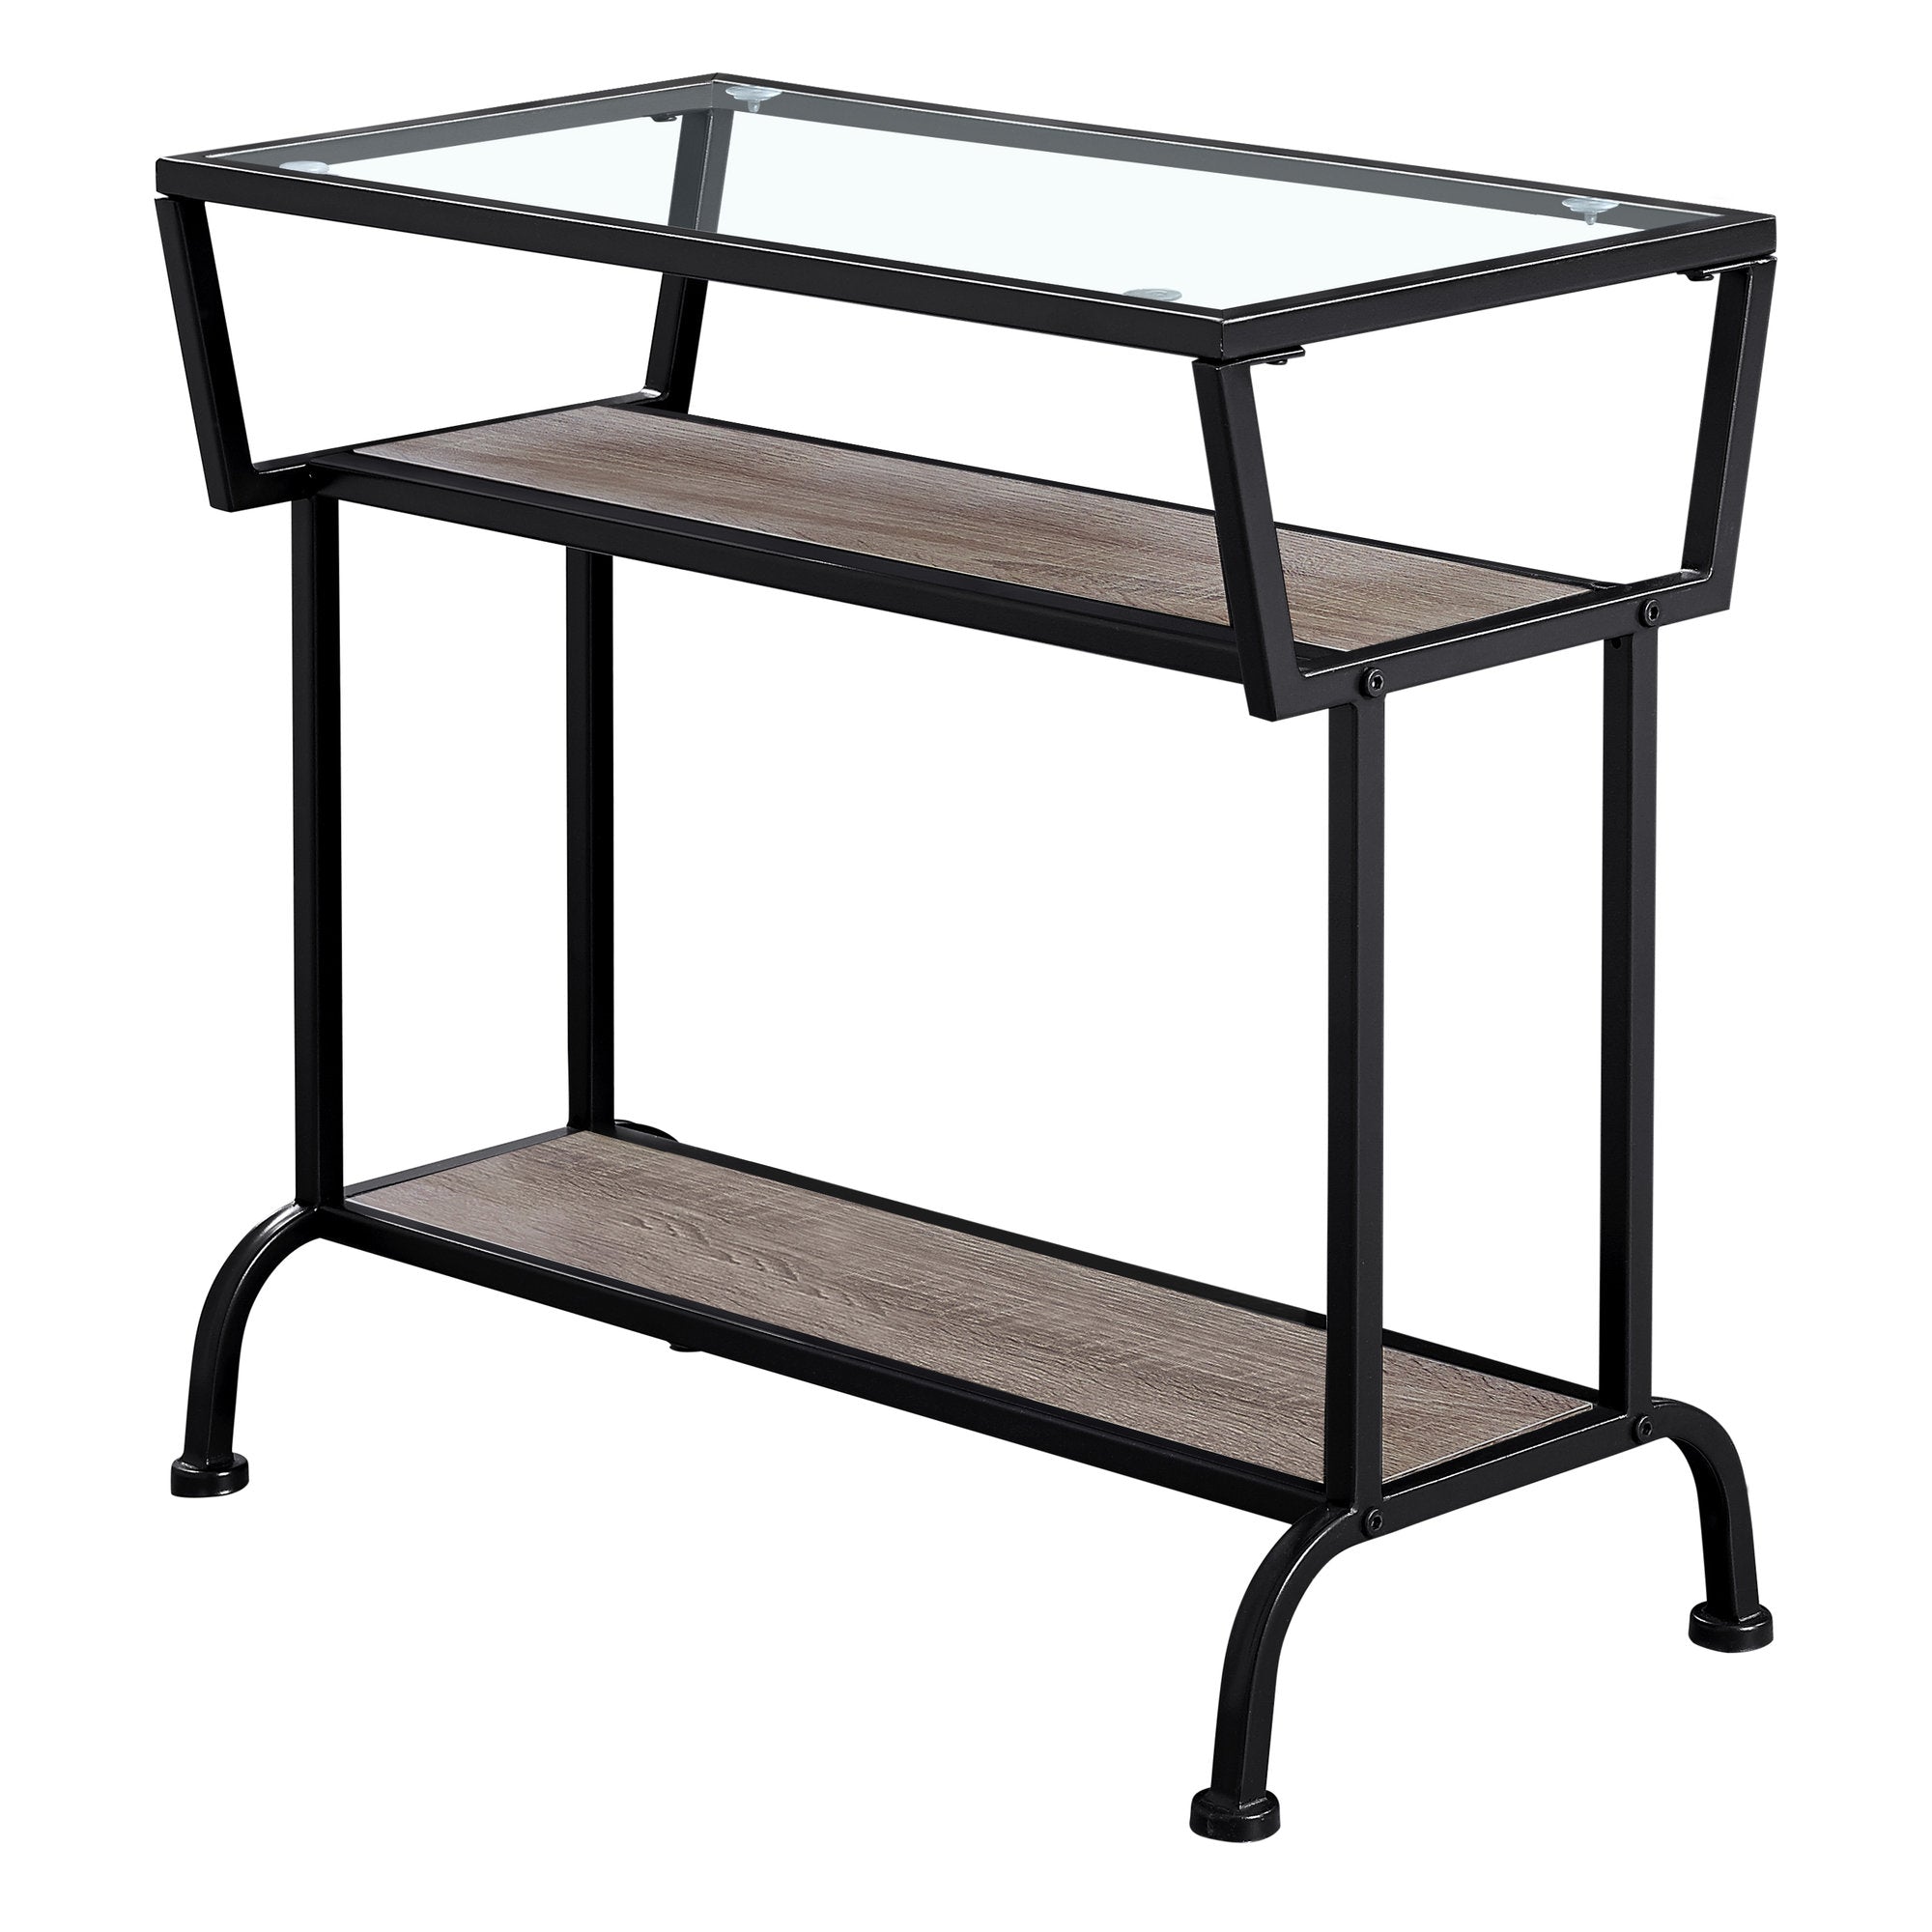 MN-792067    Accent Table, Side, End, Narrow, Small, Living Room, Bedroom, 2 Tier, Metal Base, Tempered Glass, Laminate, Dark Taupe, Black, Contemporary, Modern